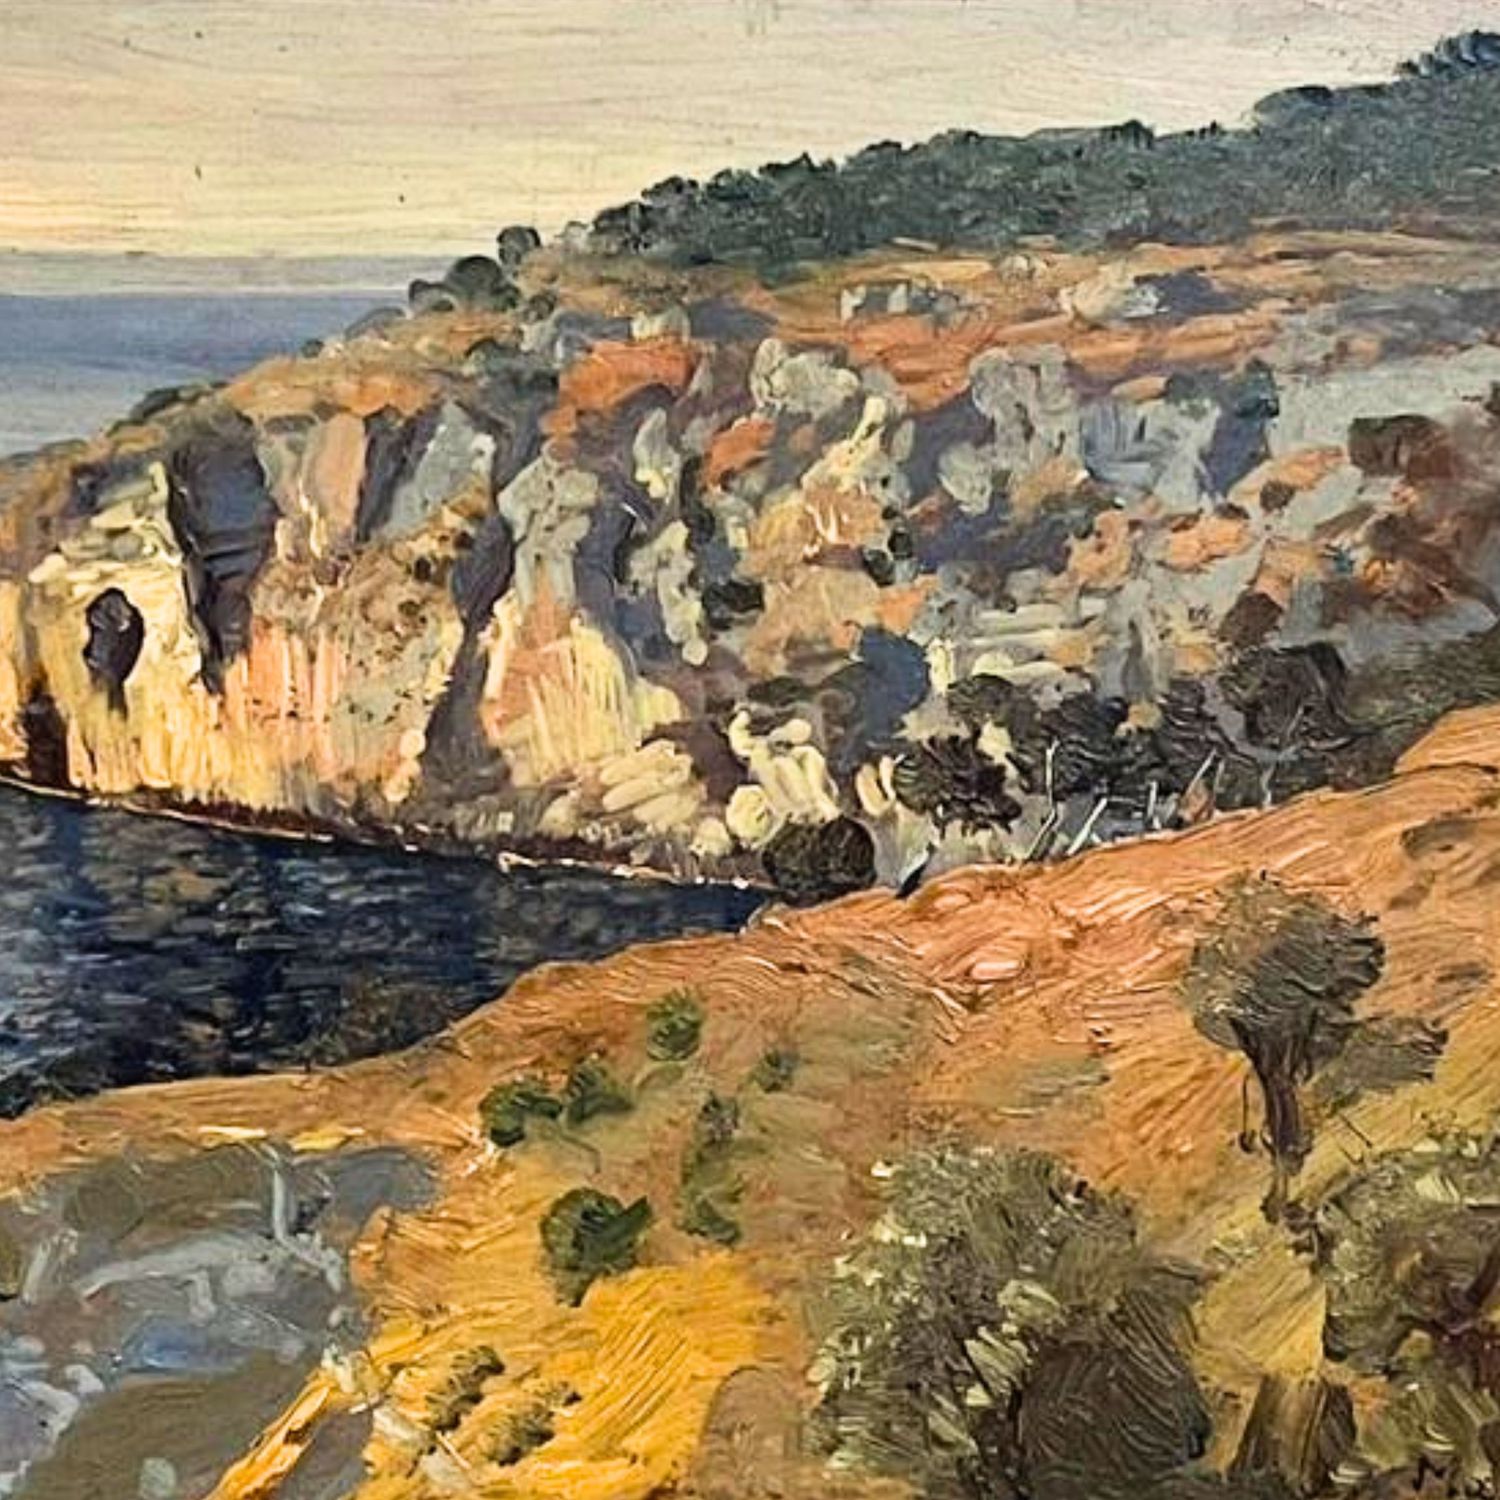 Cliff by the Sea - Max Roeder (1866 - 1947) - Image 5 of 5